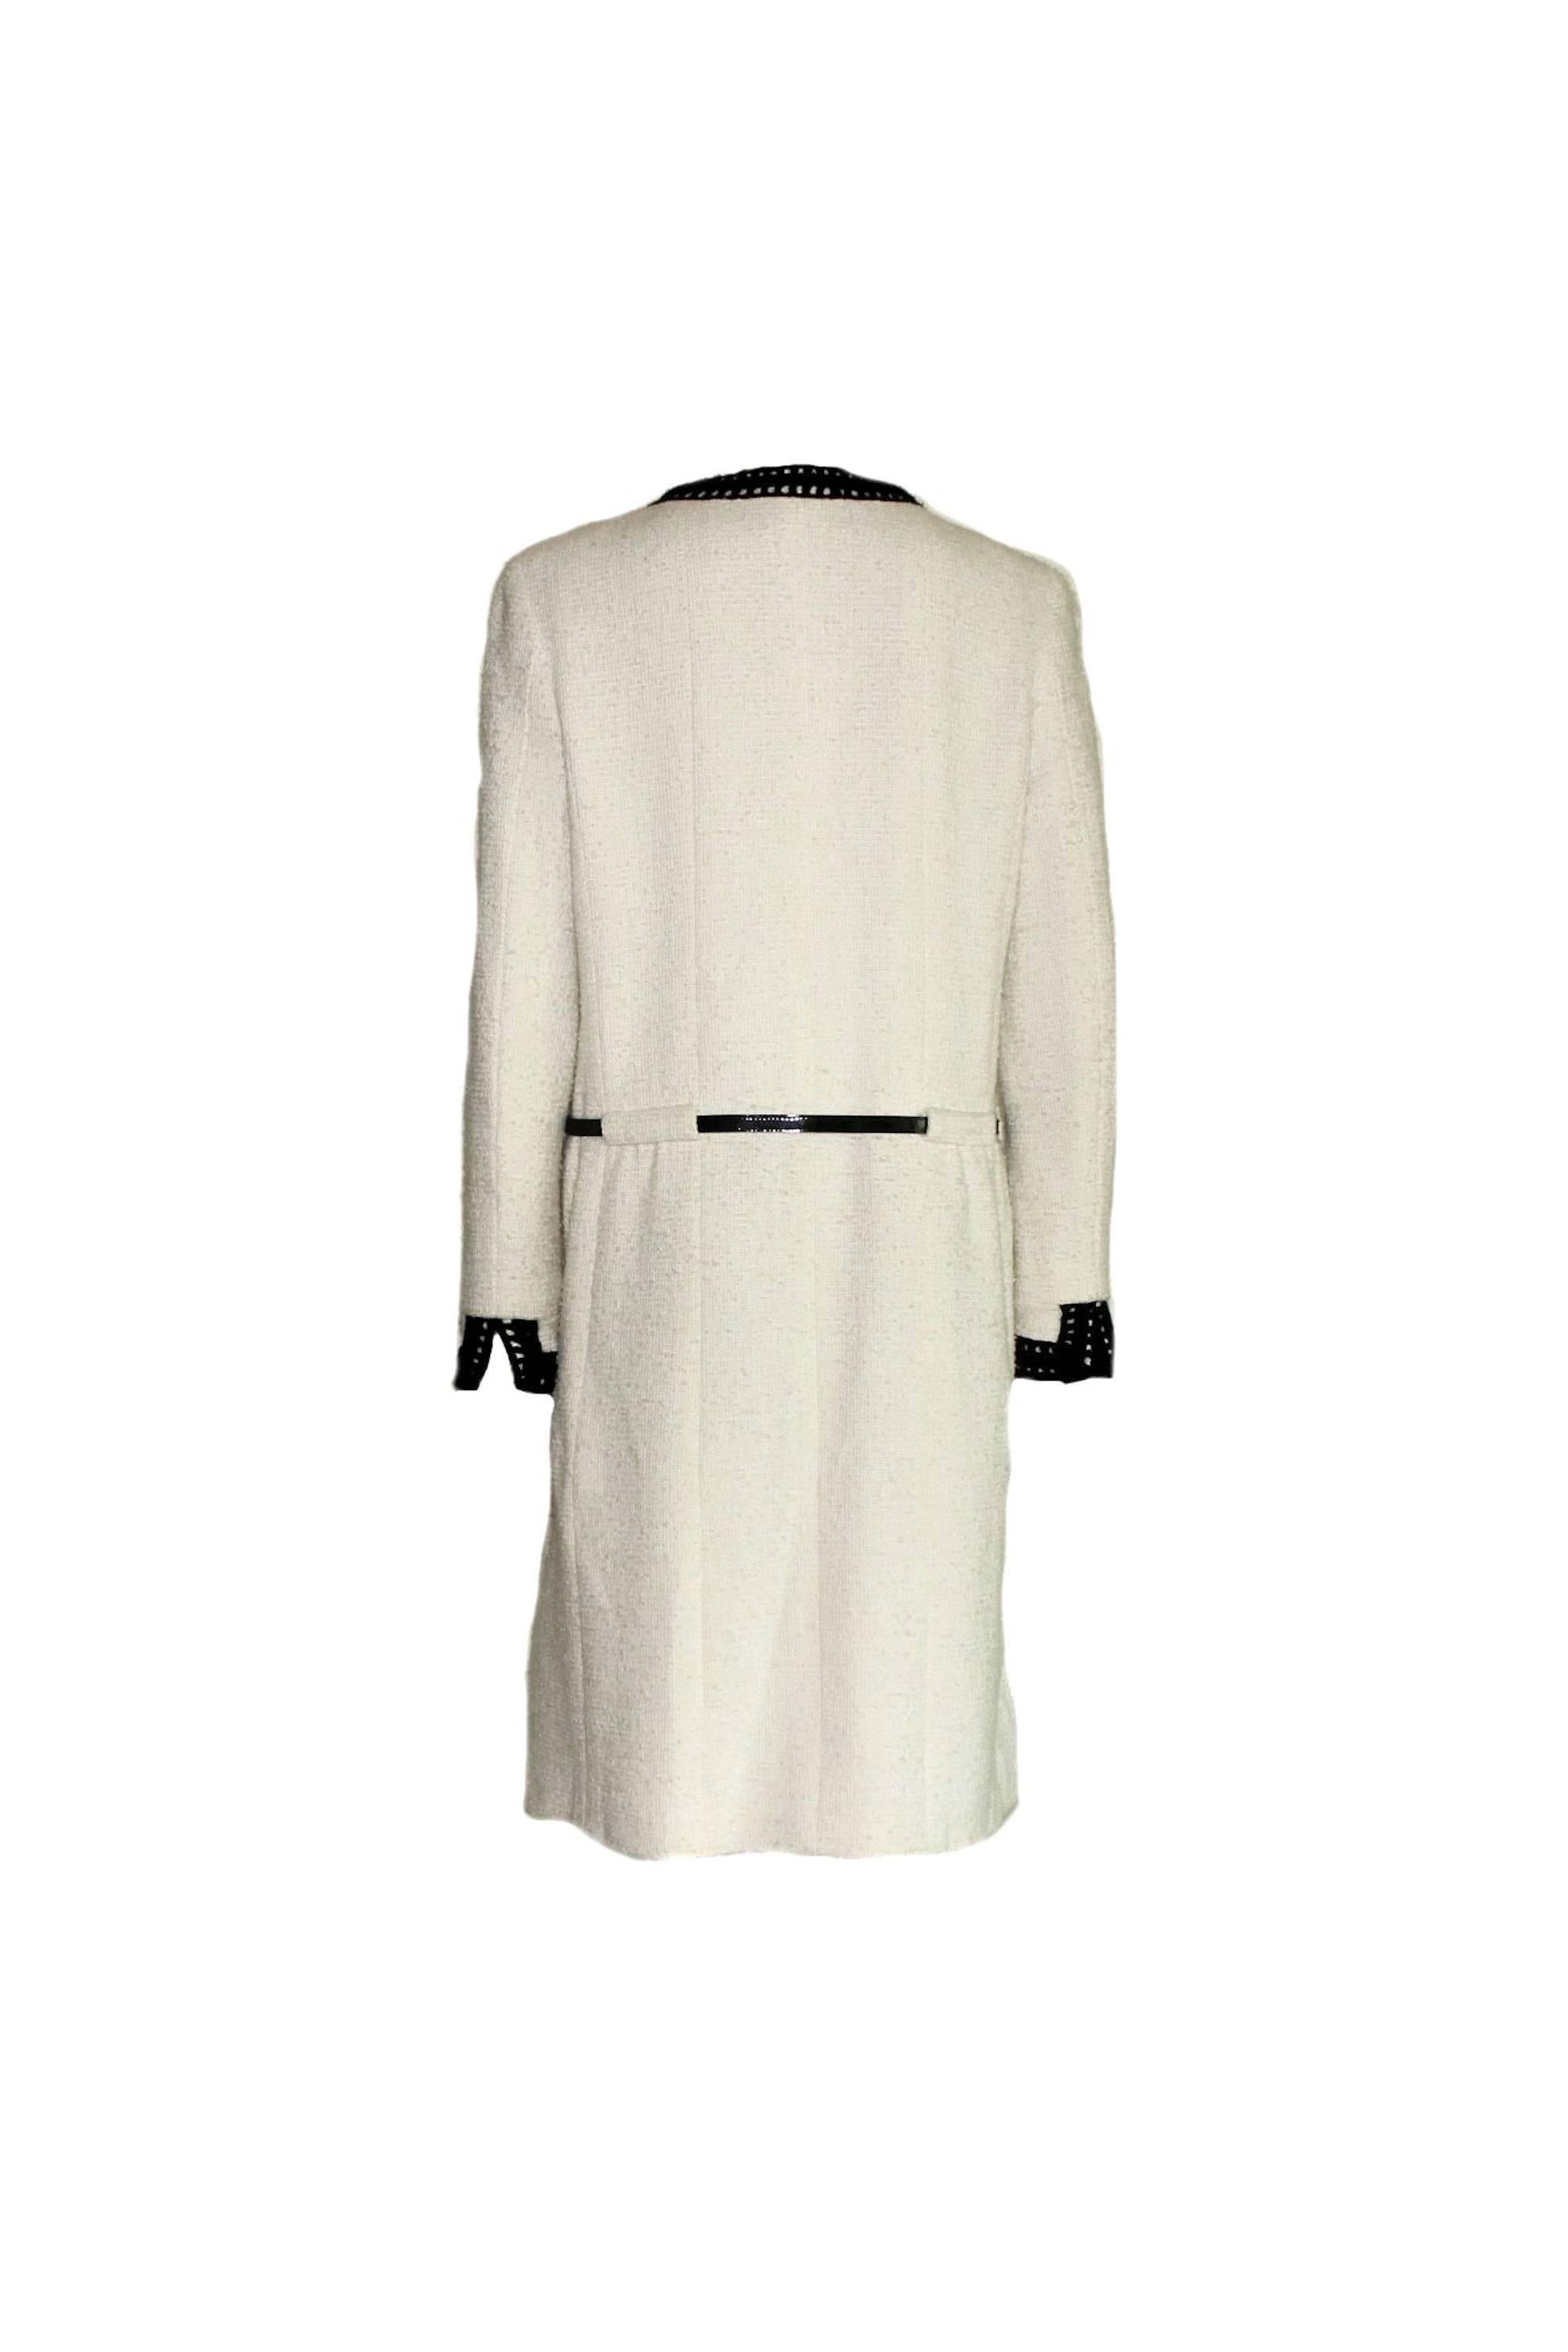 AMAZING & RARE

CHANEL SIGNATURE WHITE AND BLACK TWEED COAT

FROM CHANEL RUNWAY SHOW COLLECTION 

DESIGNED BY KARL LAGERFELD

A TRUE CHANEL PIECE THAT SHOULD BE IN EVERY WOMAN'S WARDROBE

DETAILS:
Beautiful CHANEL tweed coat designed by